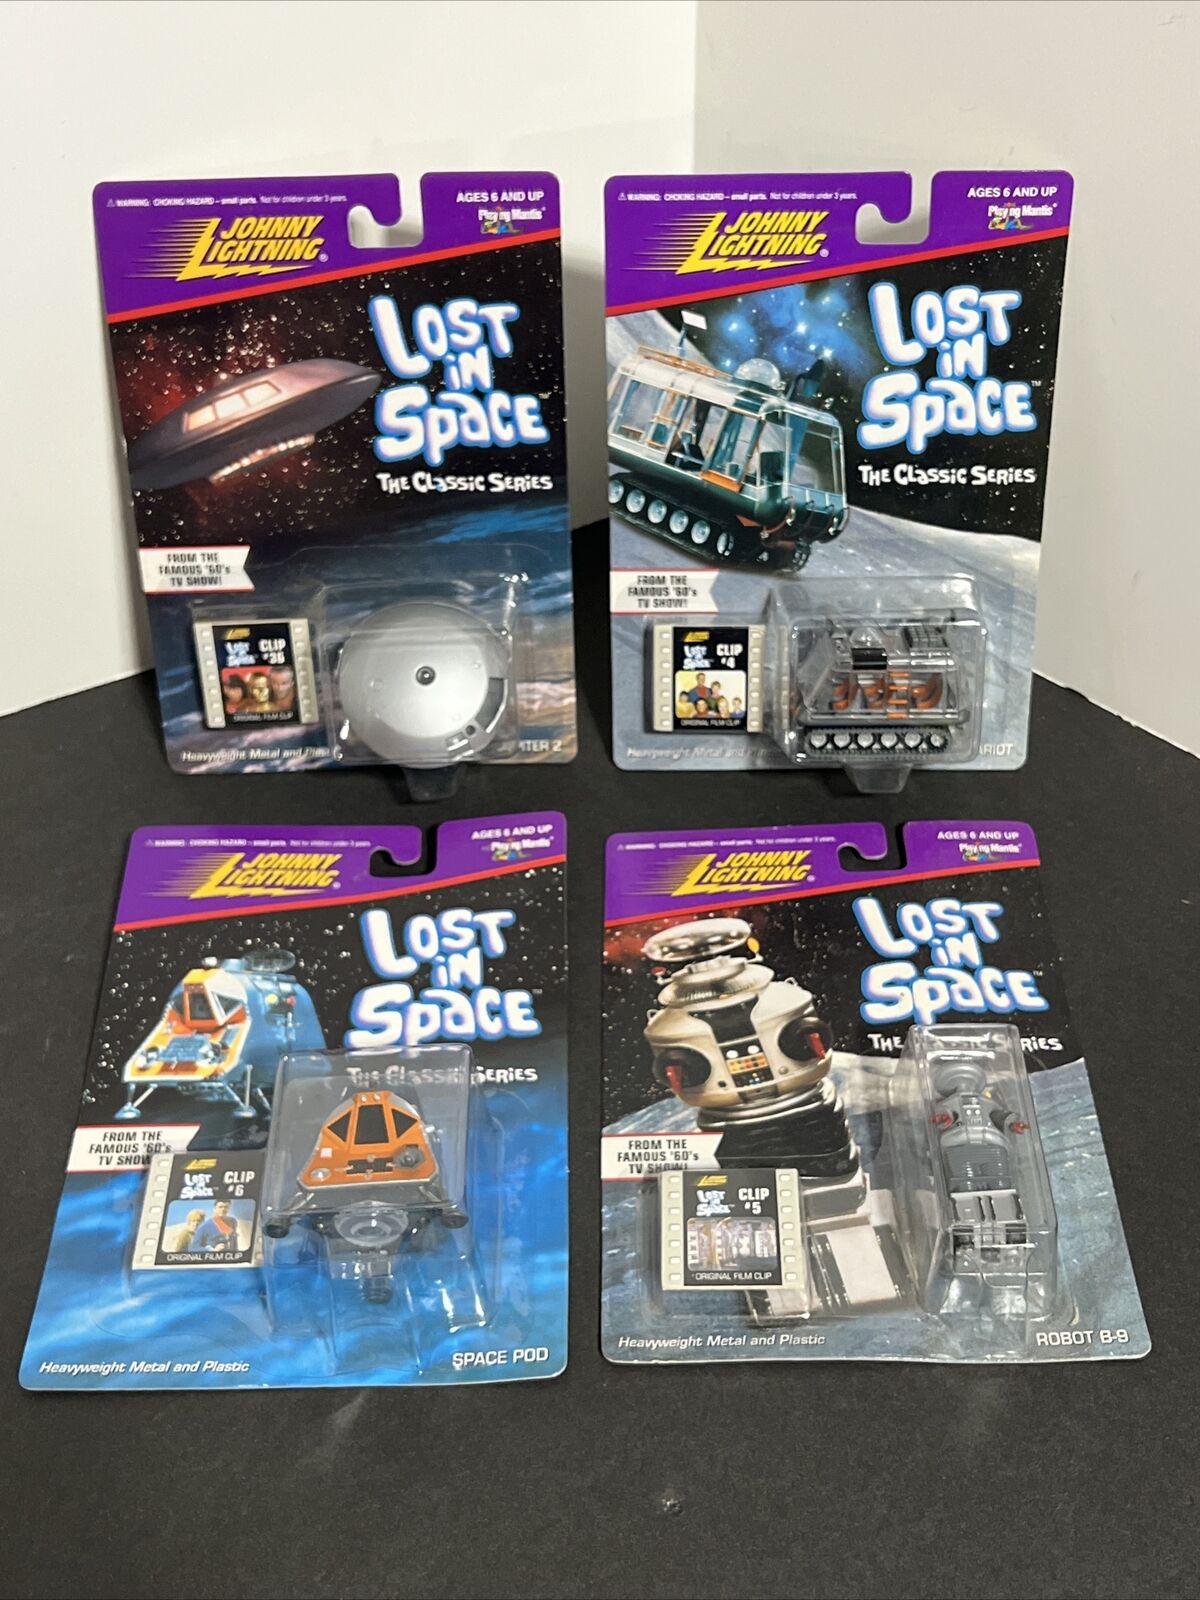 4 JOHNNY LIGHTNING LOST IN SPACE CLASSIC SERIES NEW DIE-CAST COMPLETE SET 1998